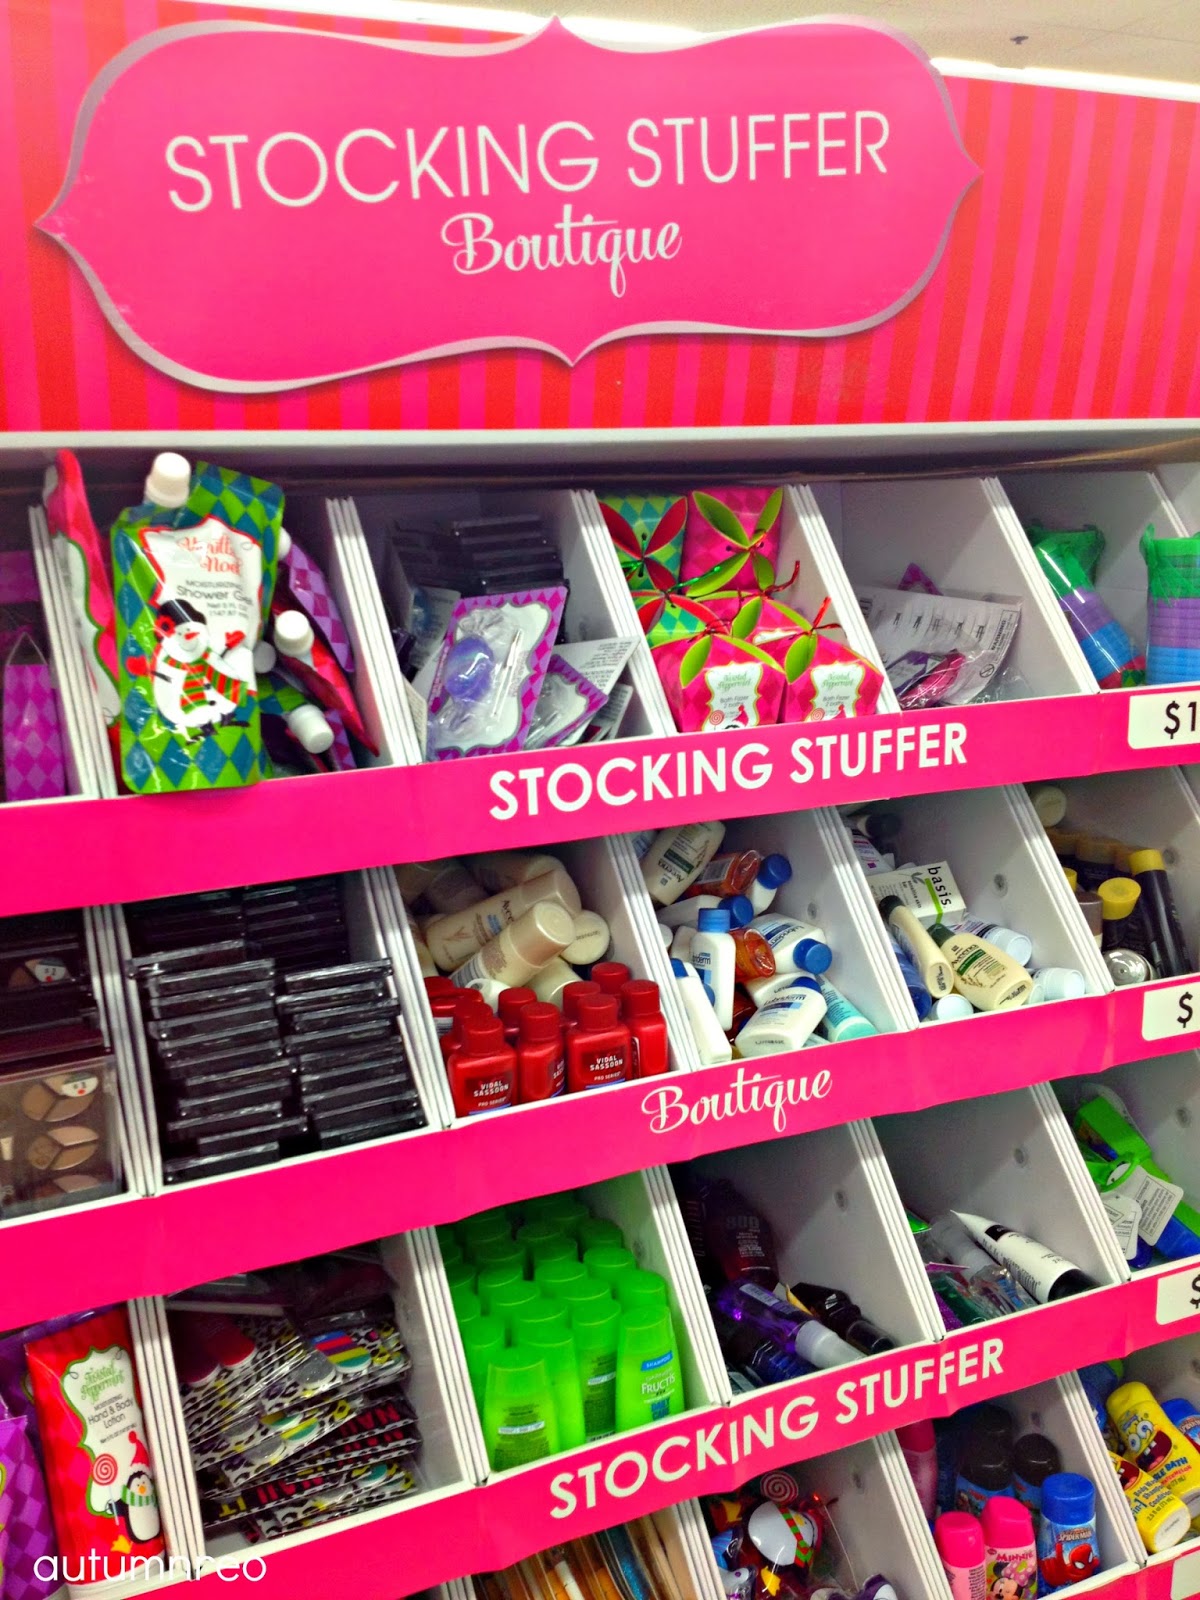 What is Gift sleeve? : r/WalgreensStores